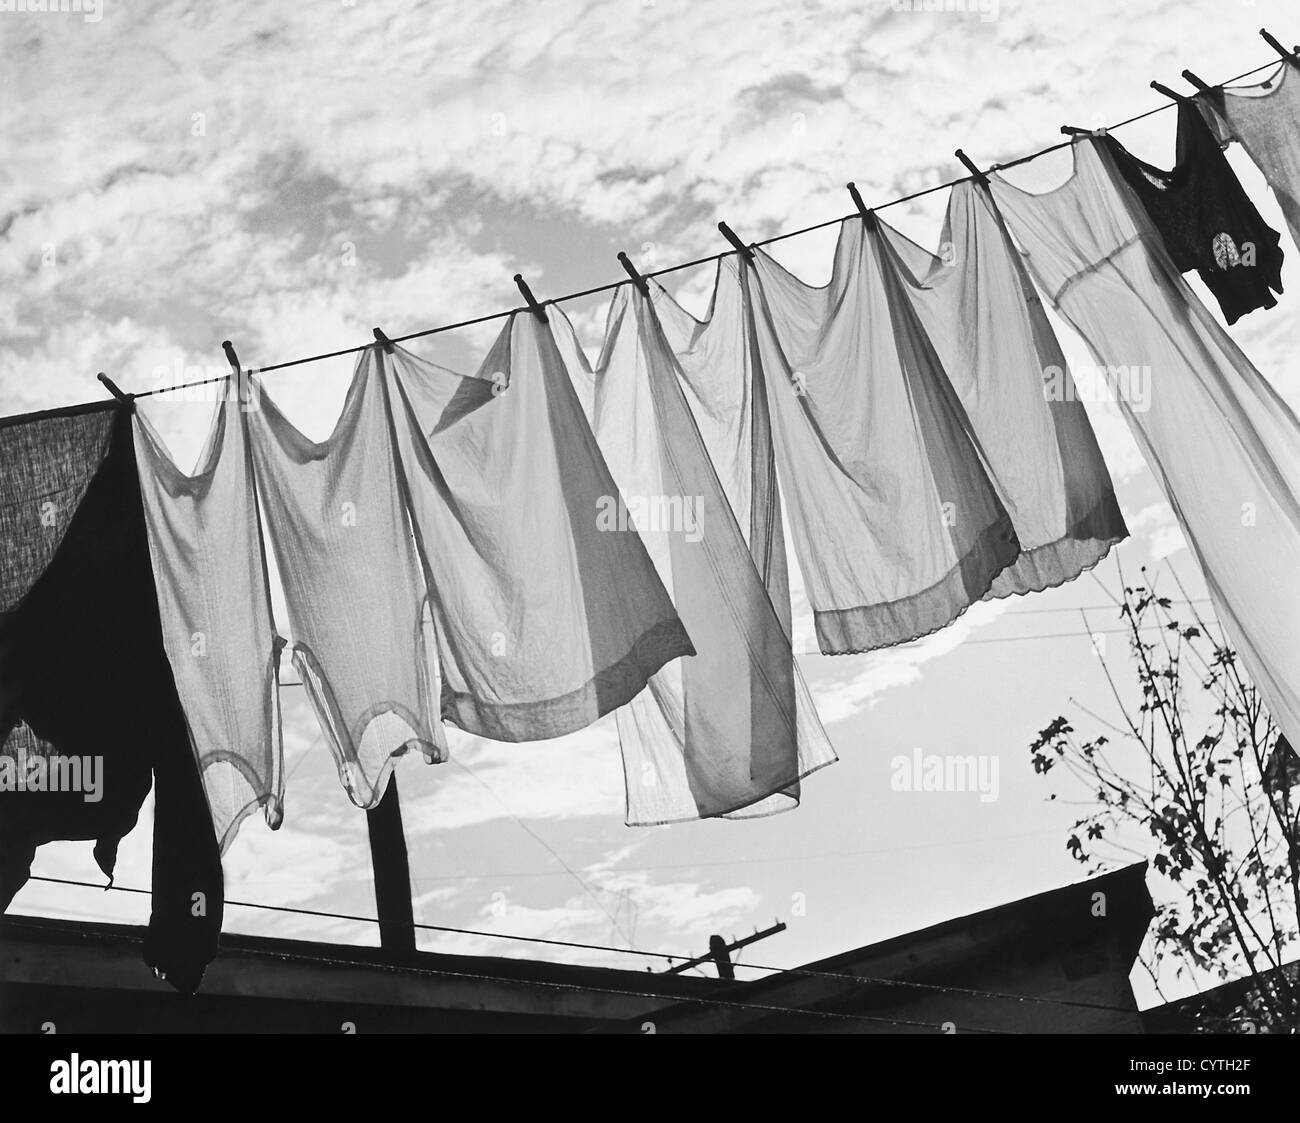 Clothes hanging on clothesline Stock Photo